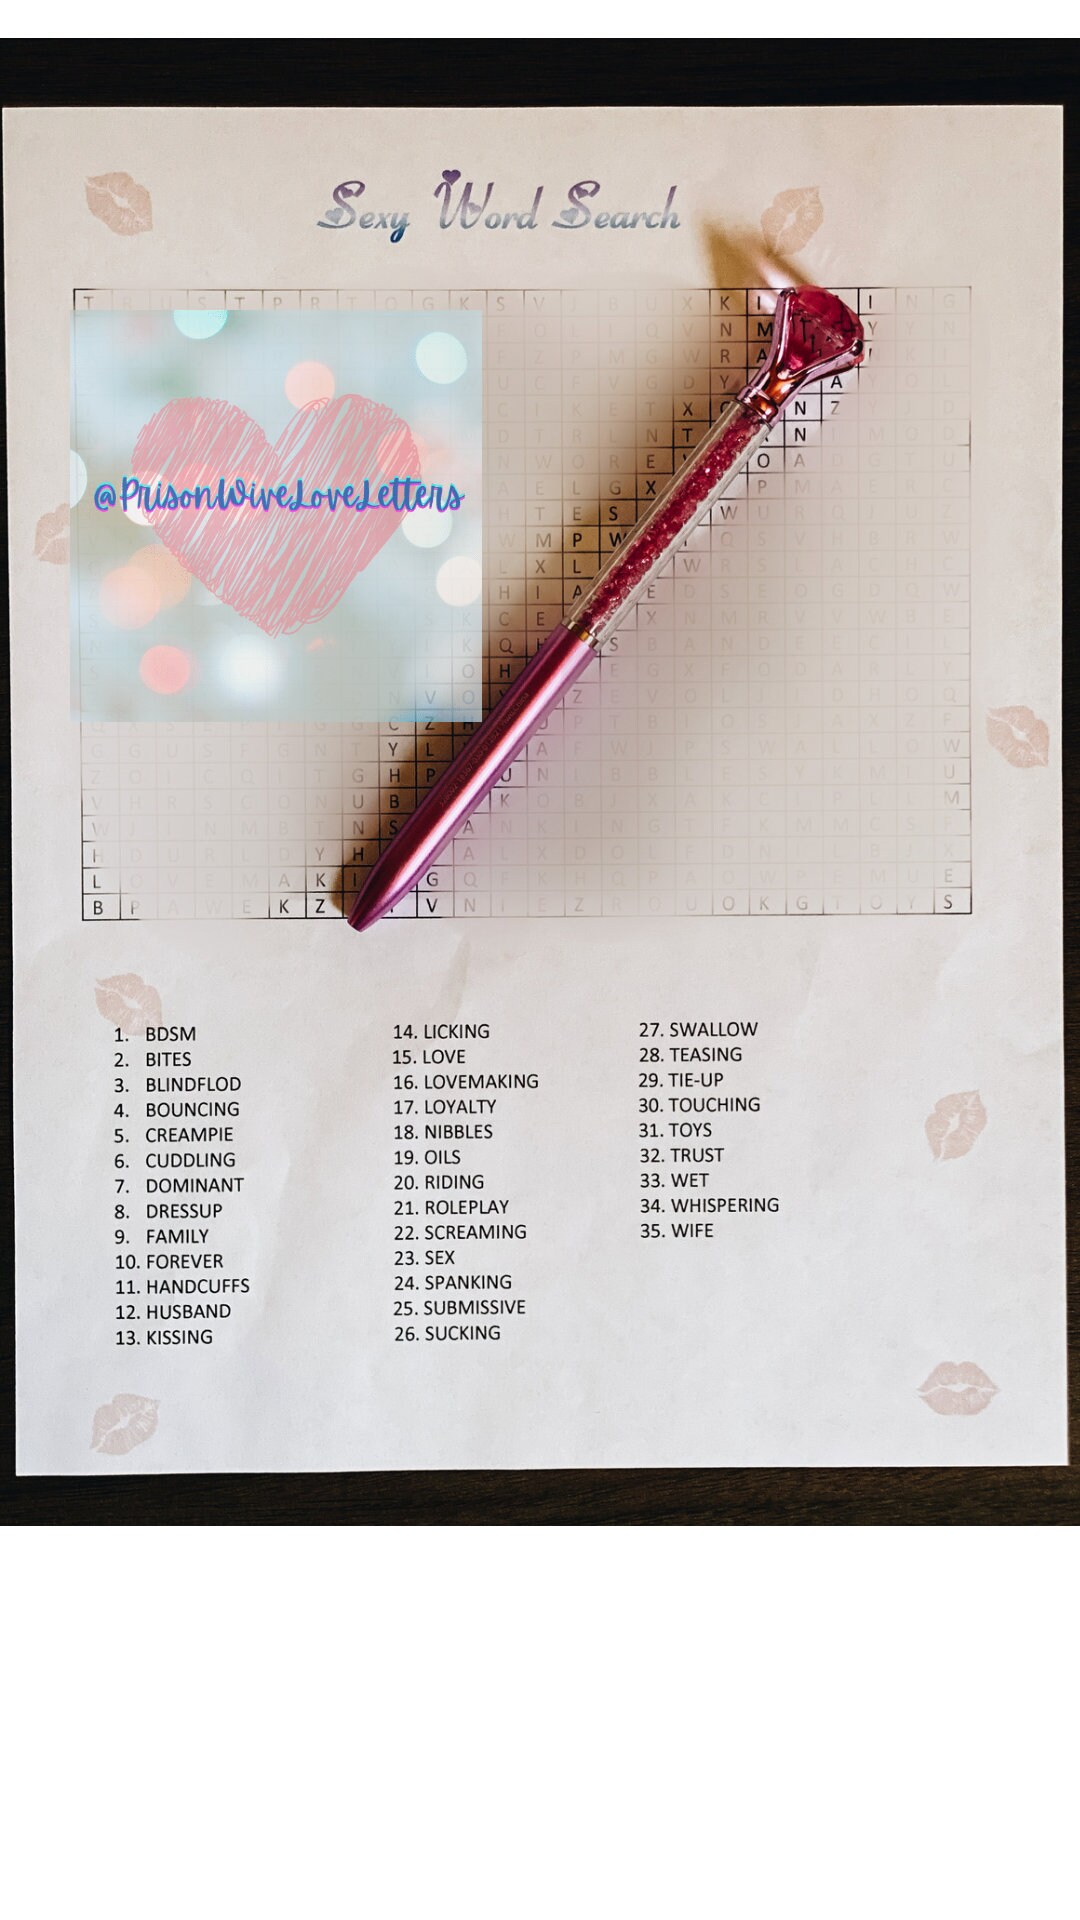 Prison Wife Games Fun Personalized Stationary Love Wife